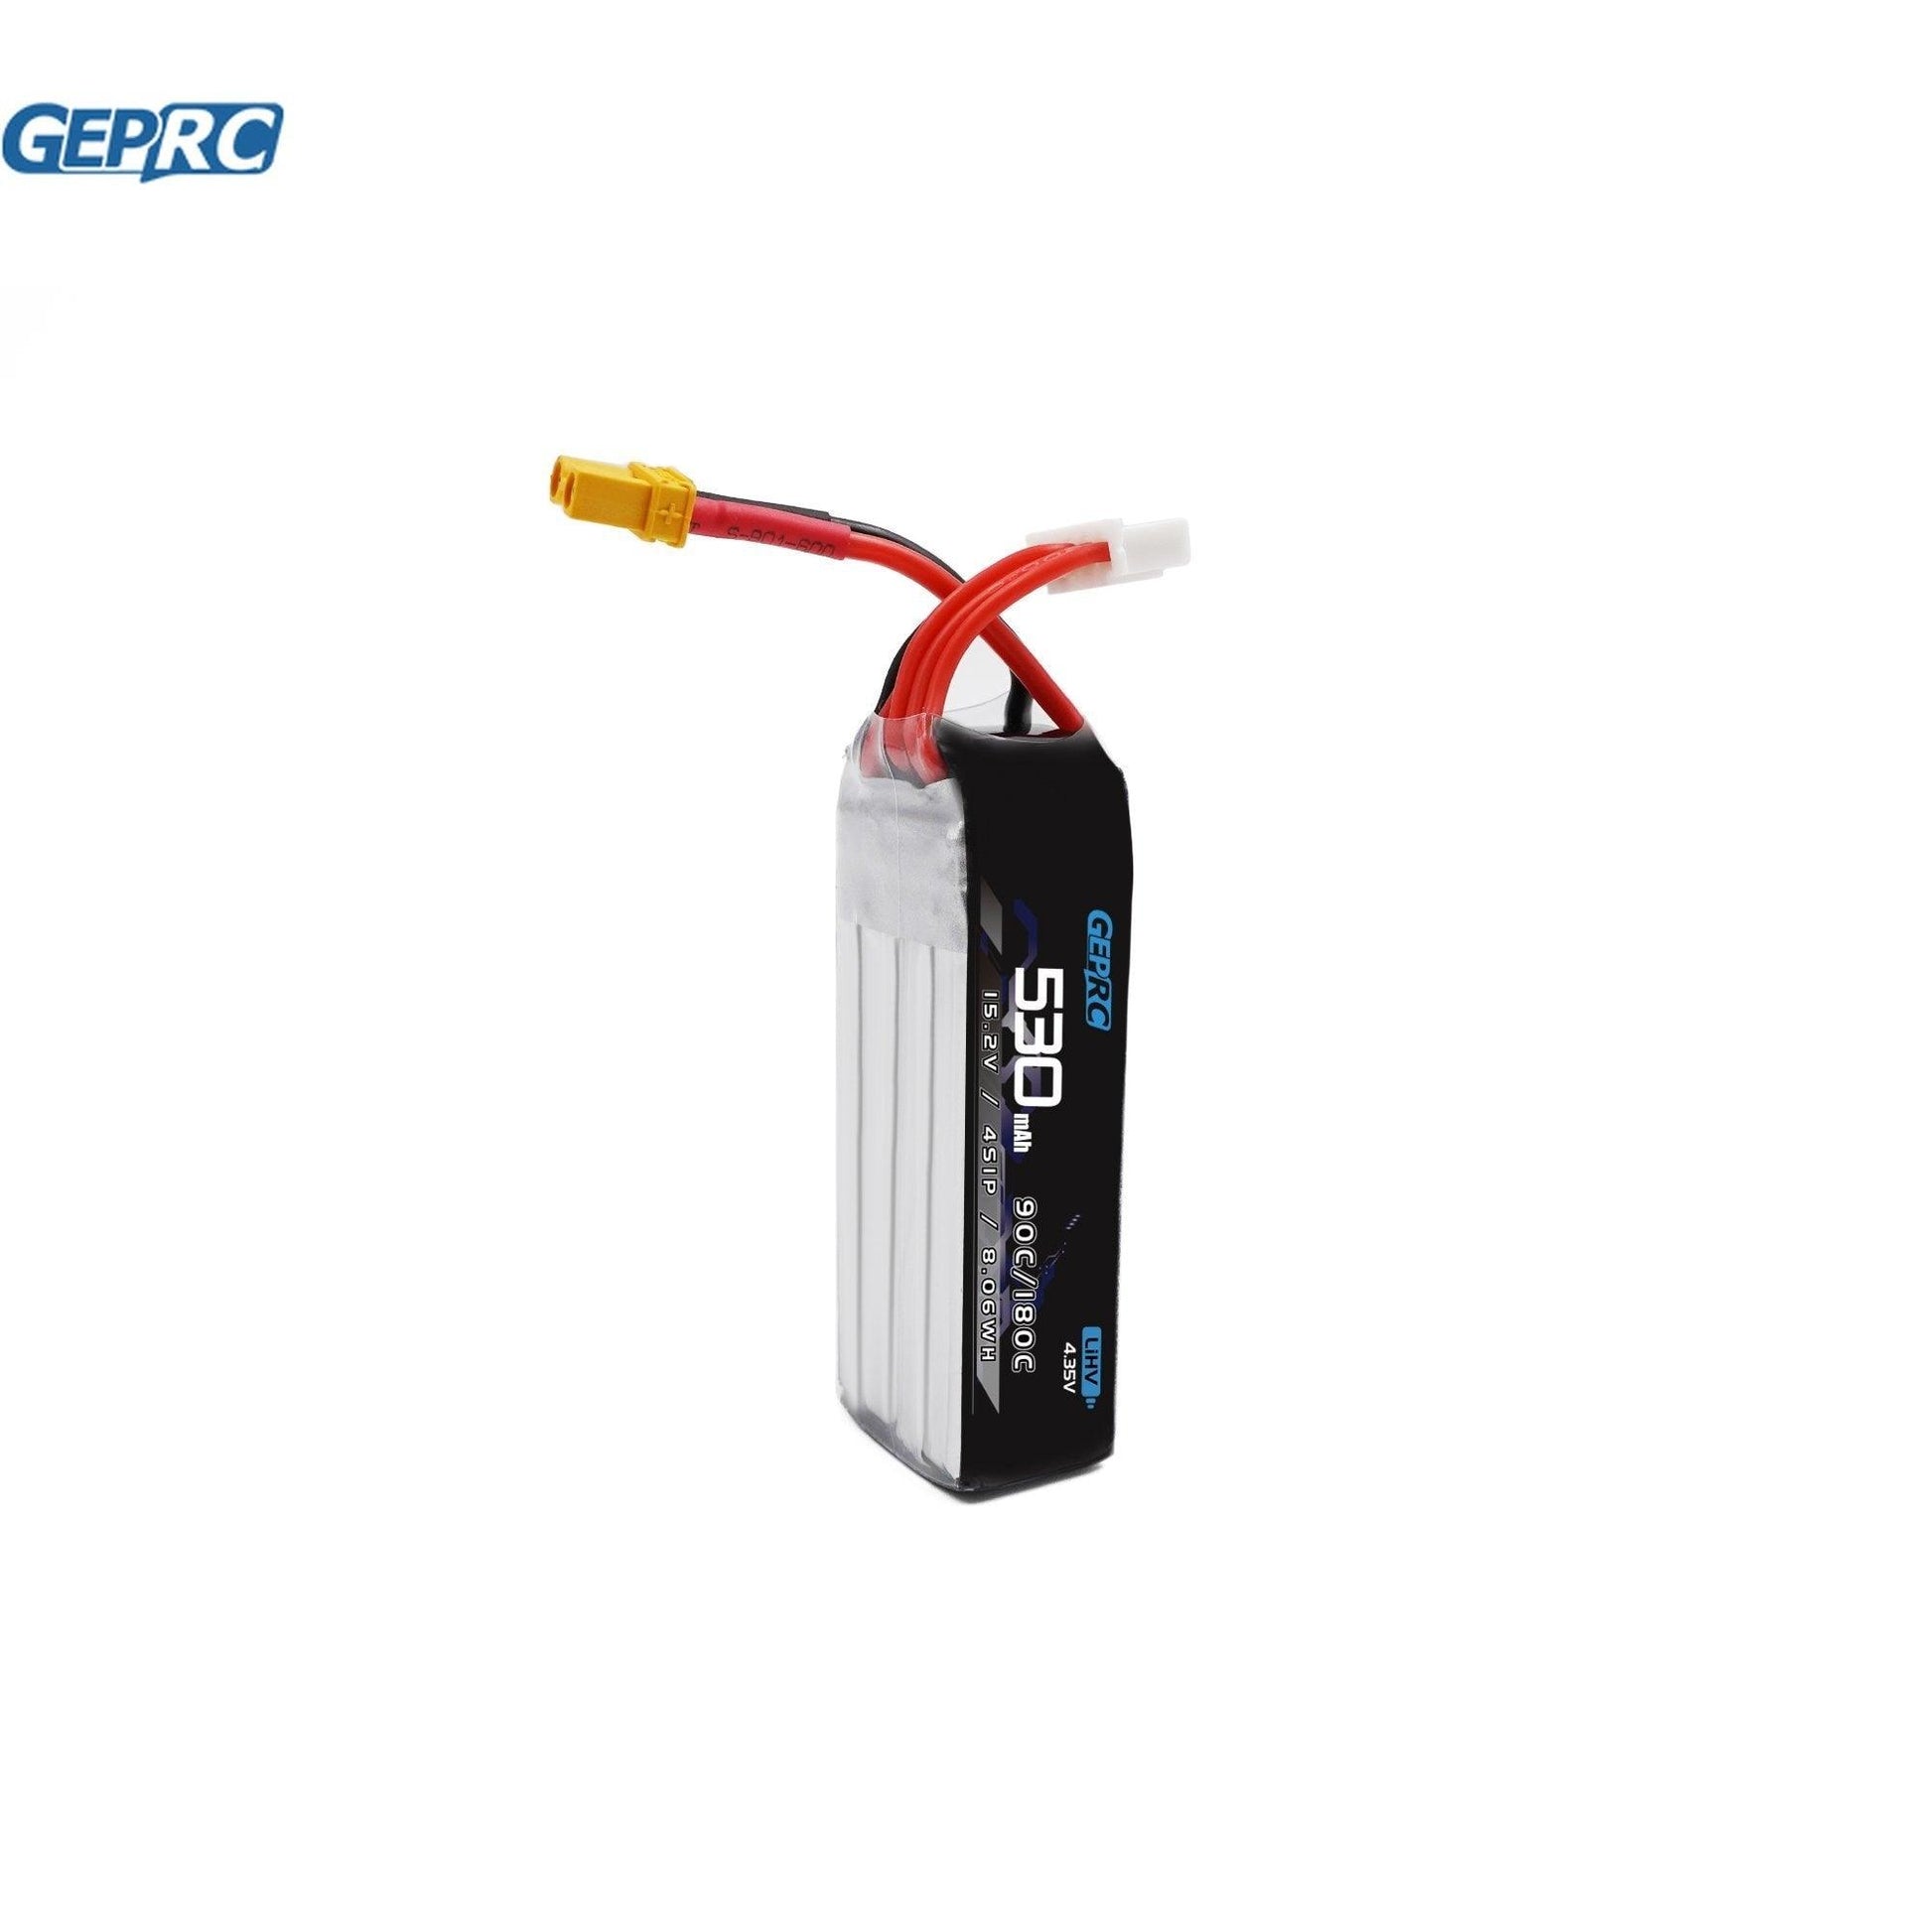 GEPRC 4S 530mAh LiPo Battery - 90/180C HV 3.8V/4.35V Battery Suitable For 2-3Inch Series Drone For RC FPV Quadcopter Accessories FPV Battery - RCDrone